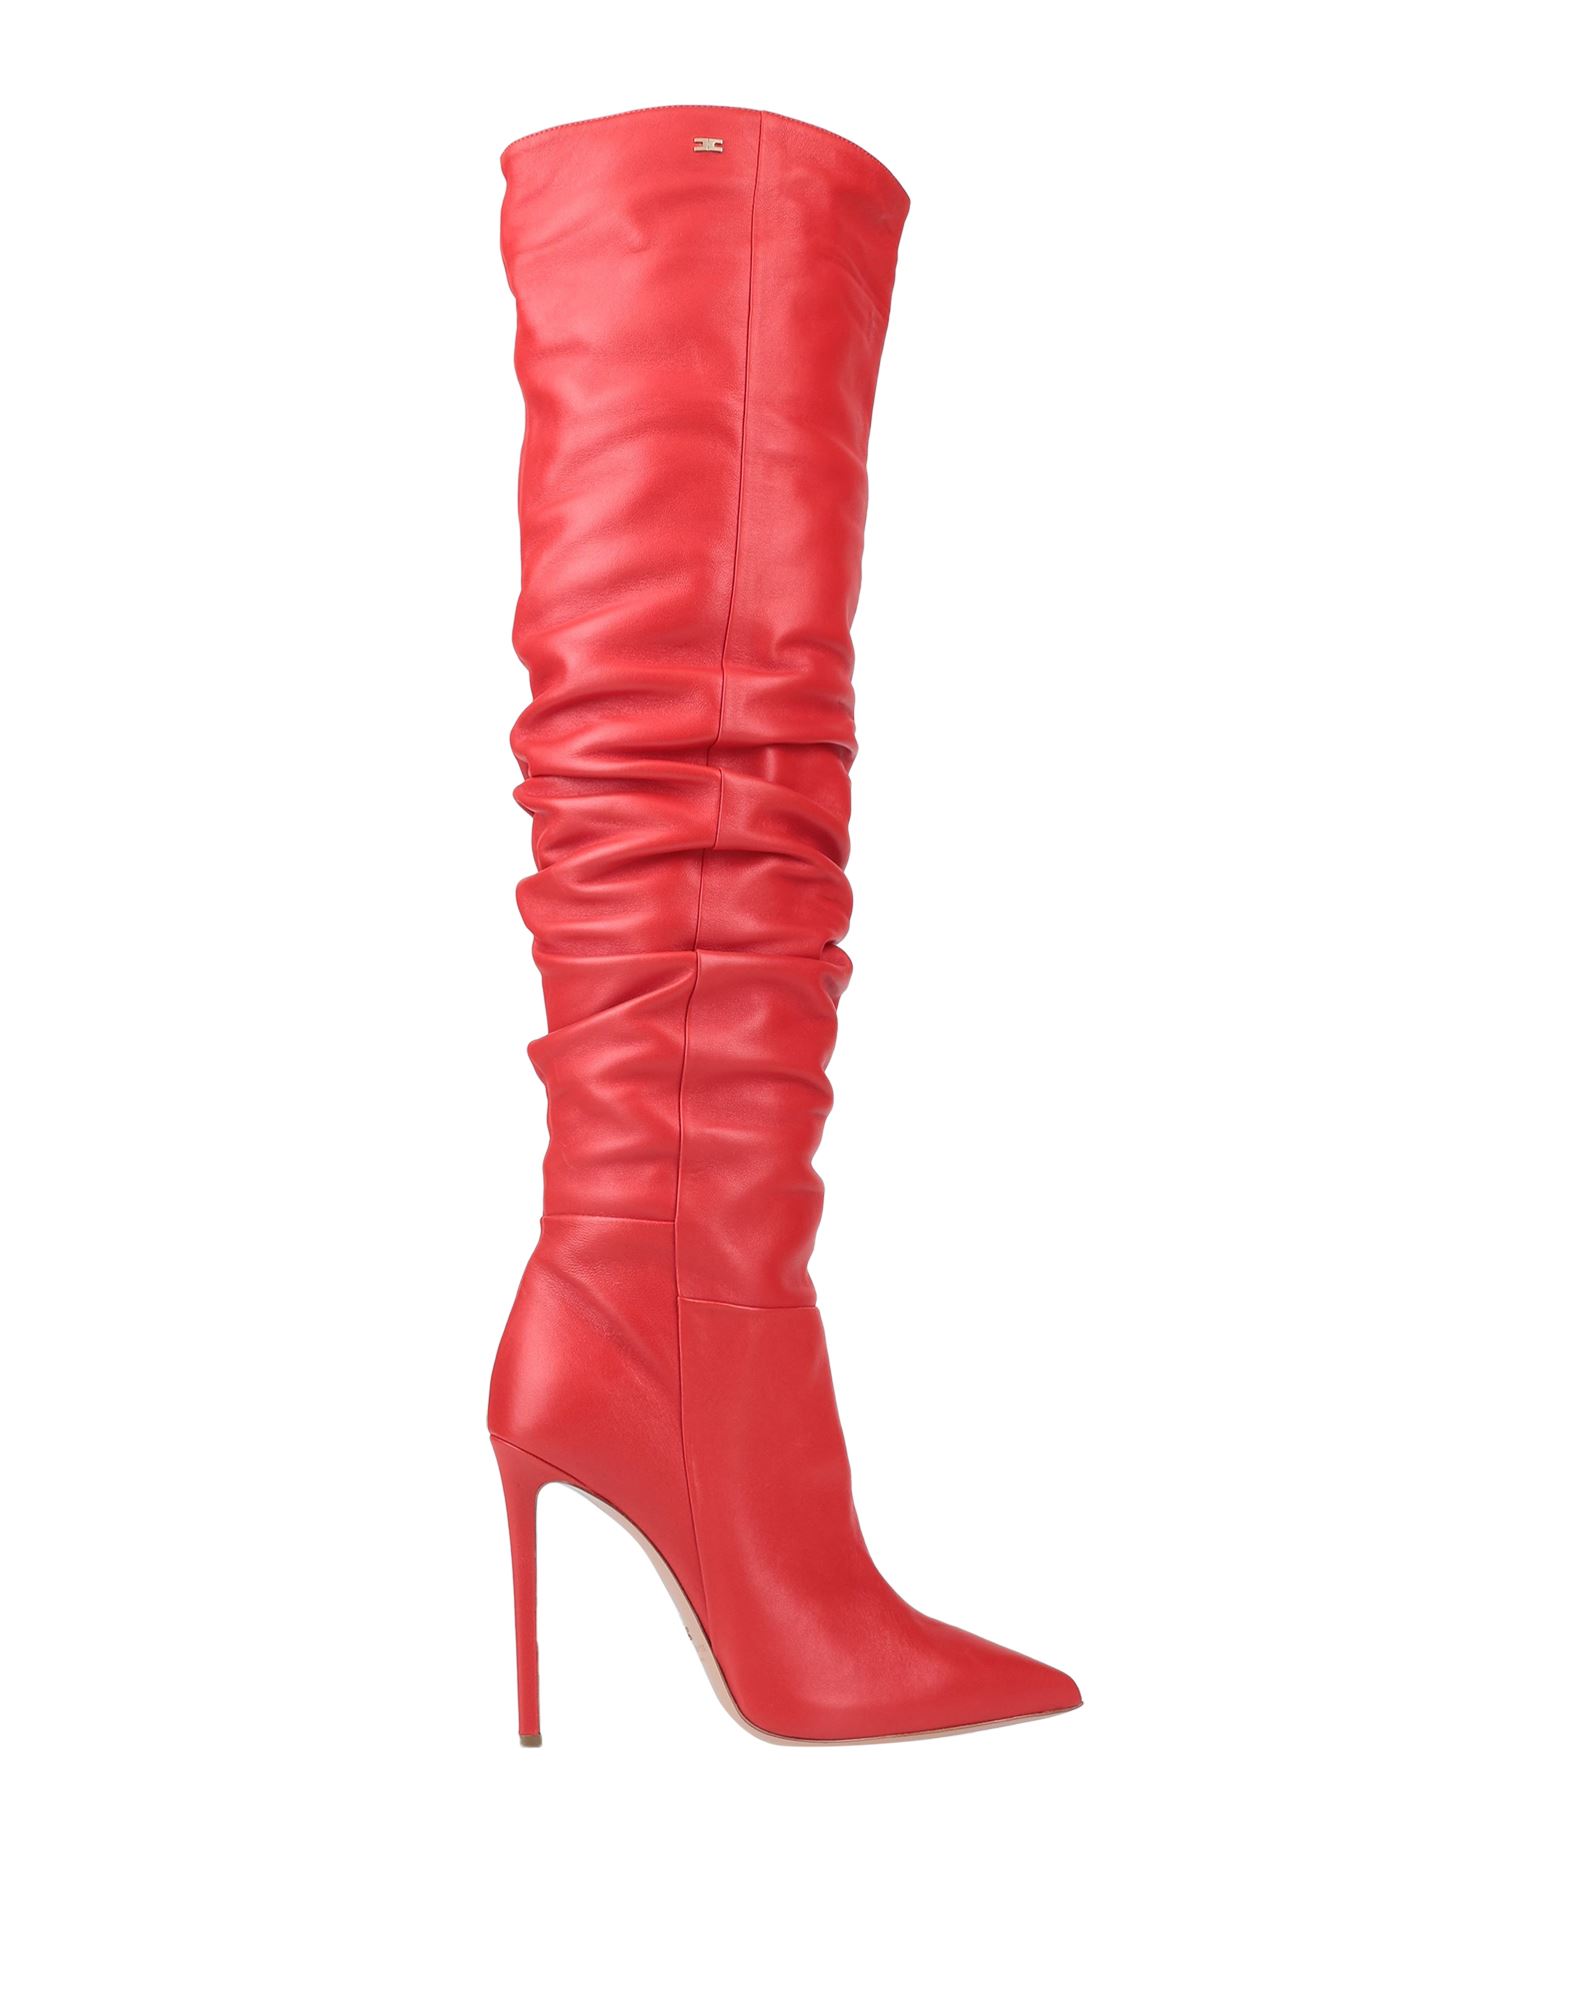 Elisabetta Franchi Woman Boot Red Size 5 Soft Leather